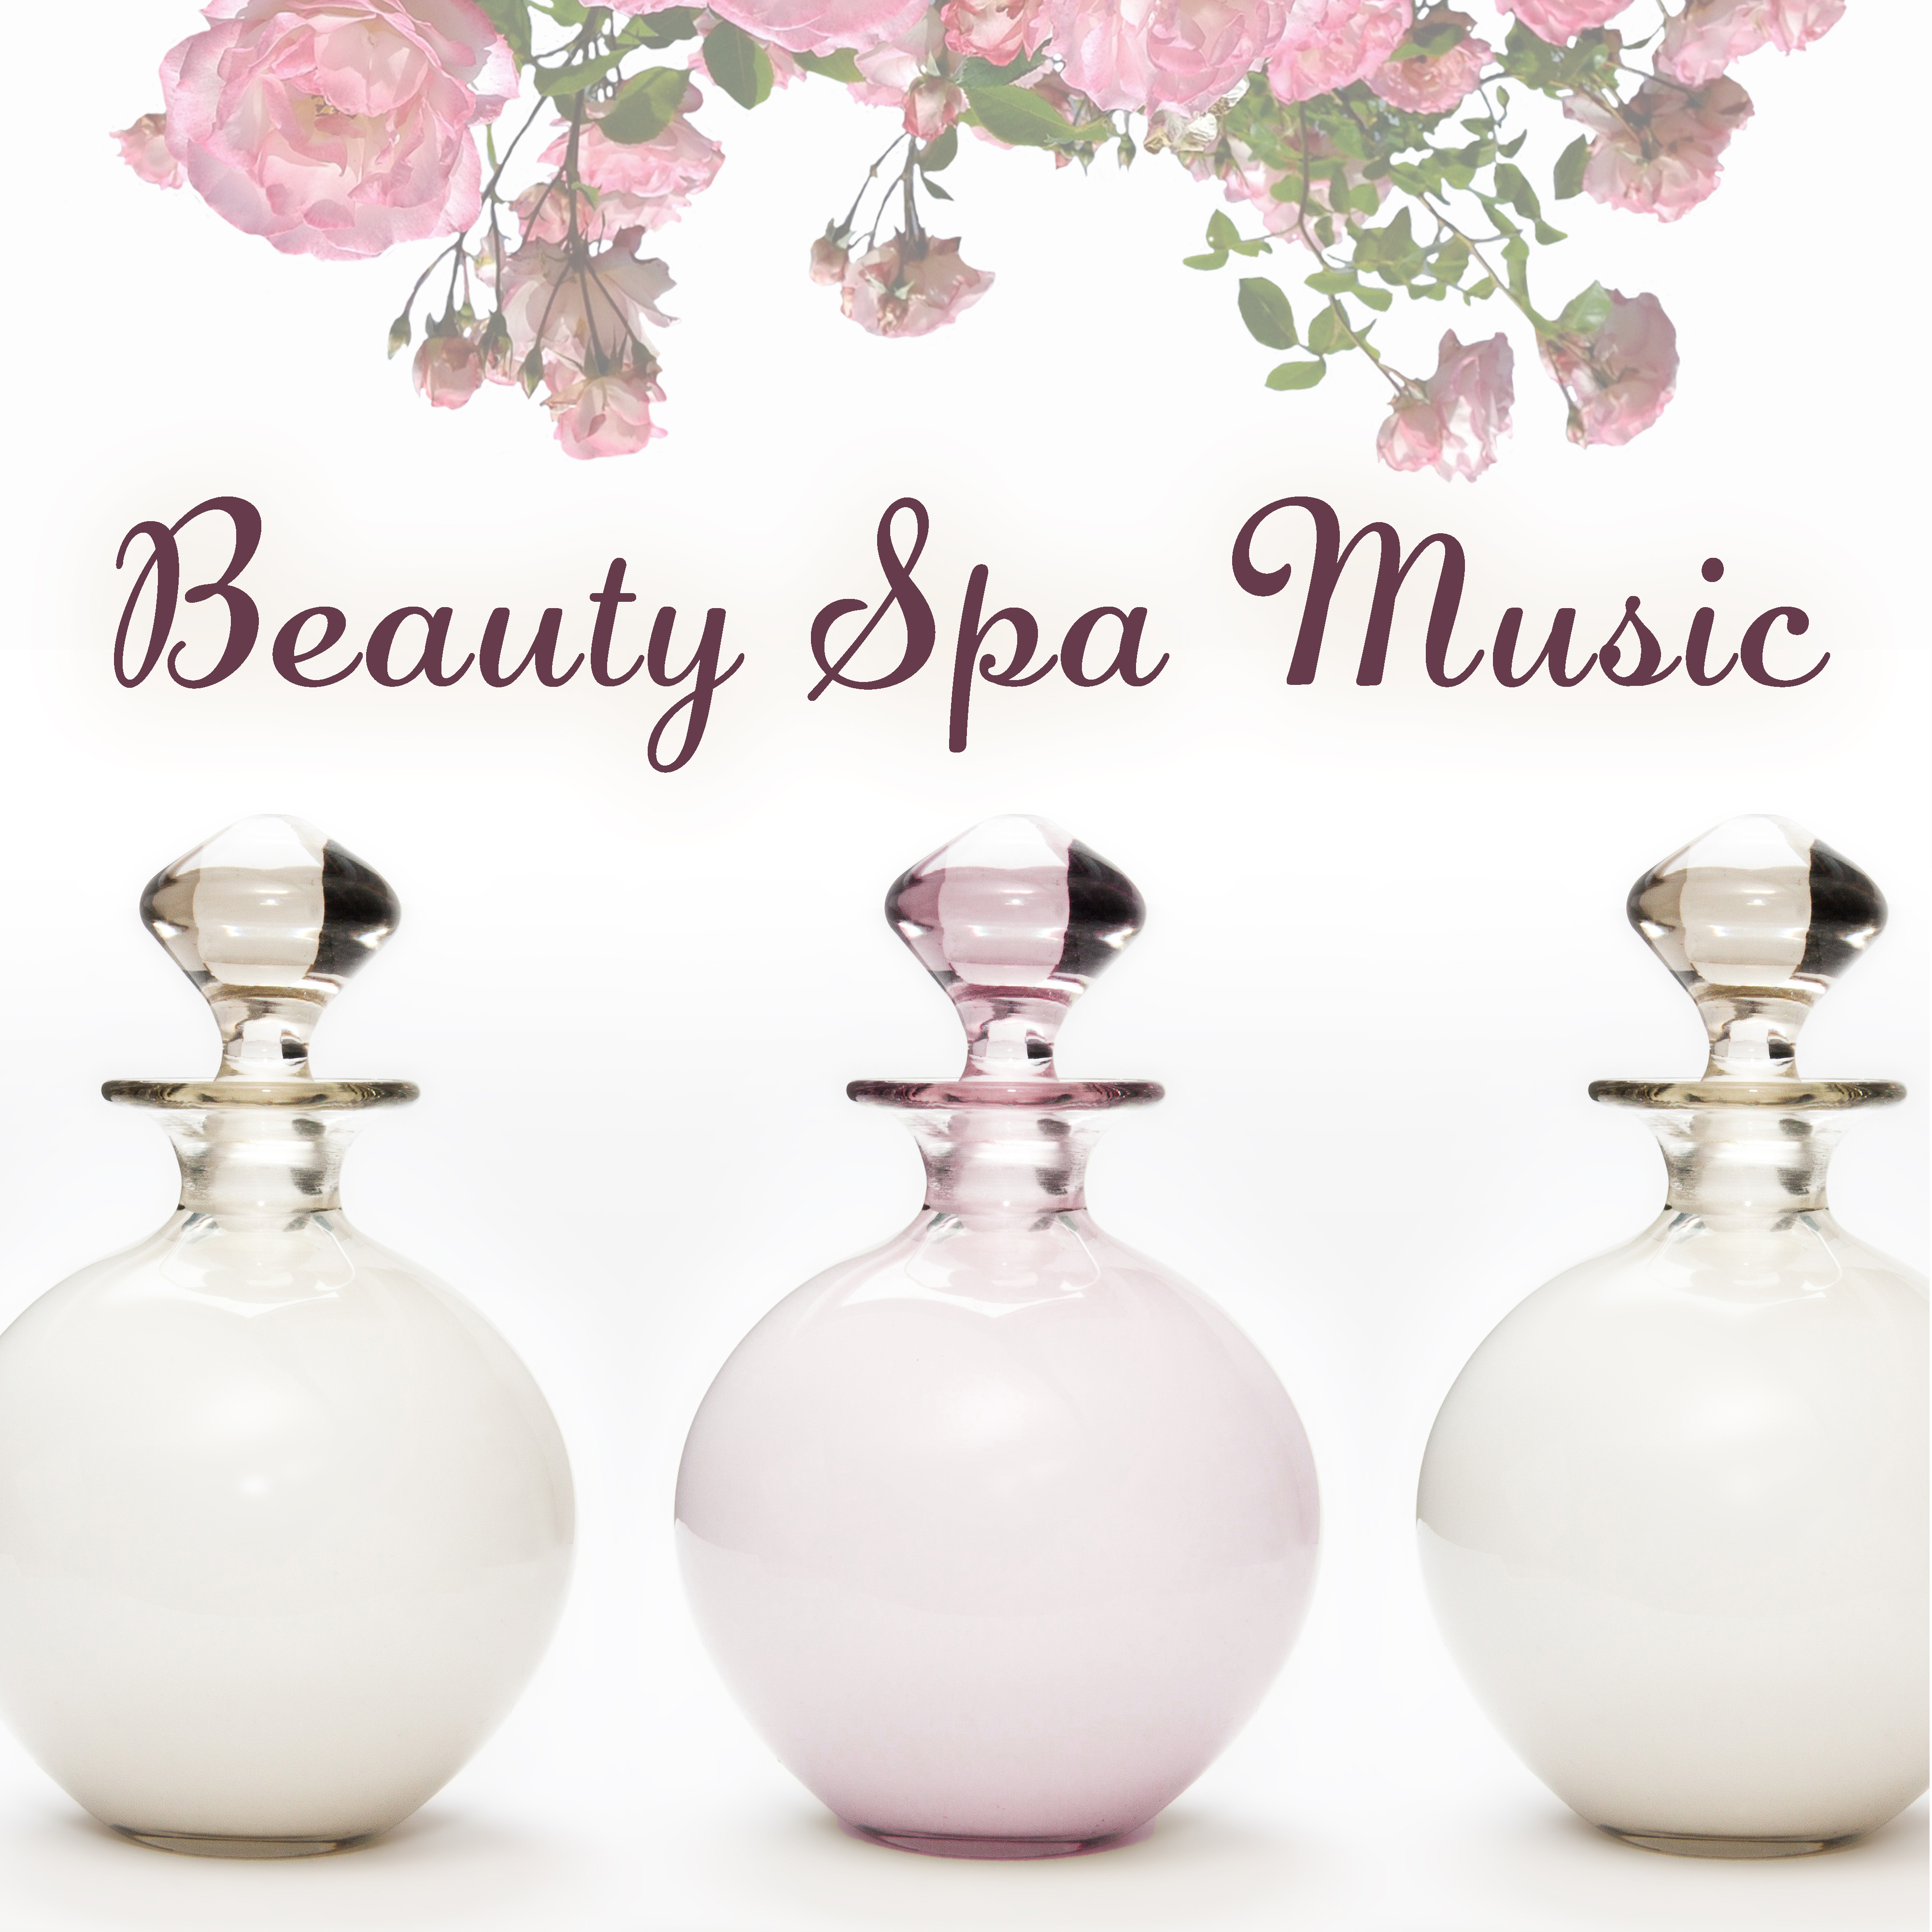 Beauty Spa Music – Relaxing Music for Spa, Wellness, Water Sounds Music